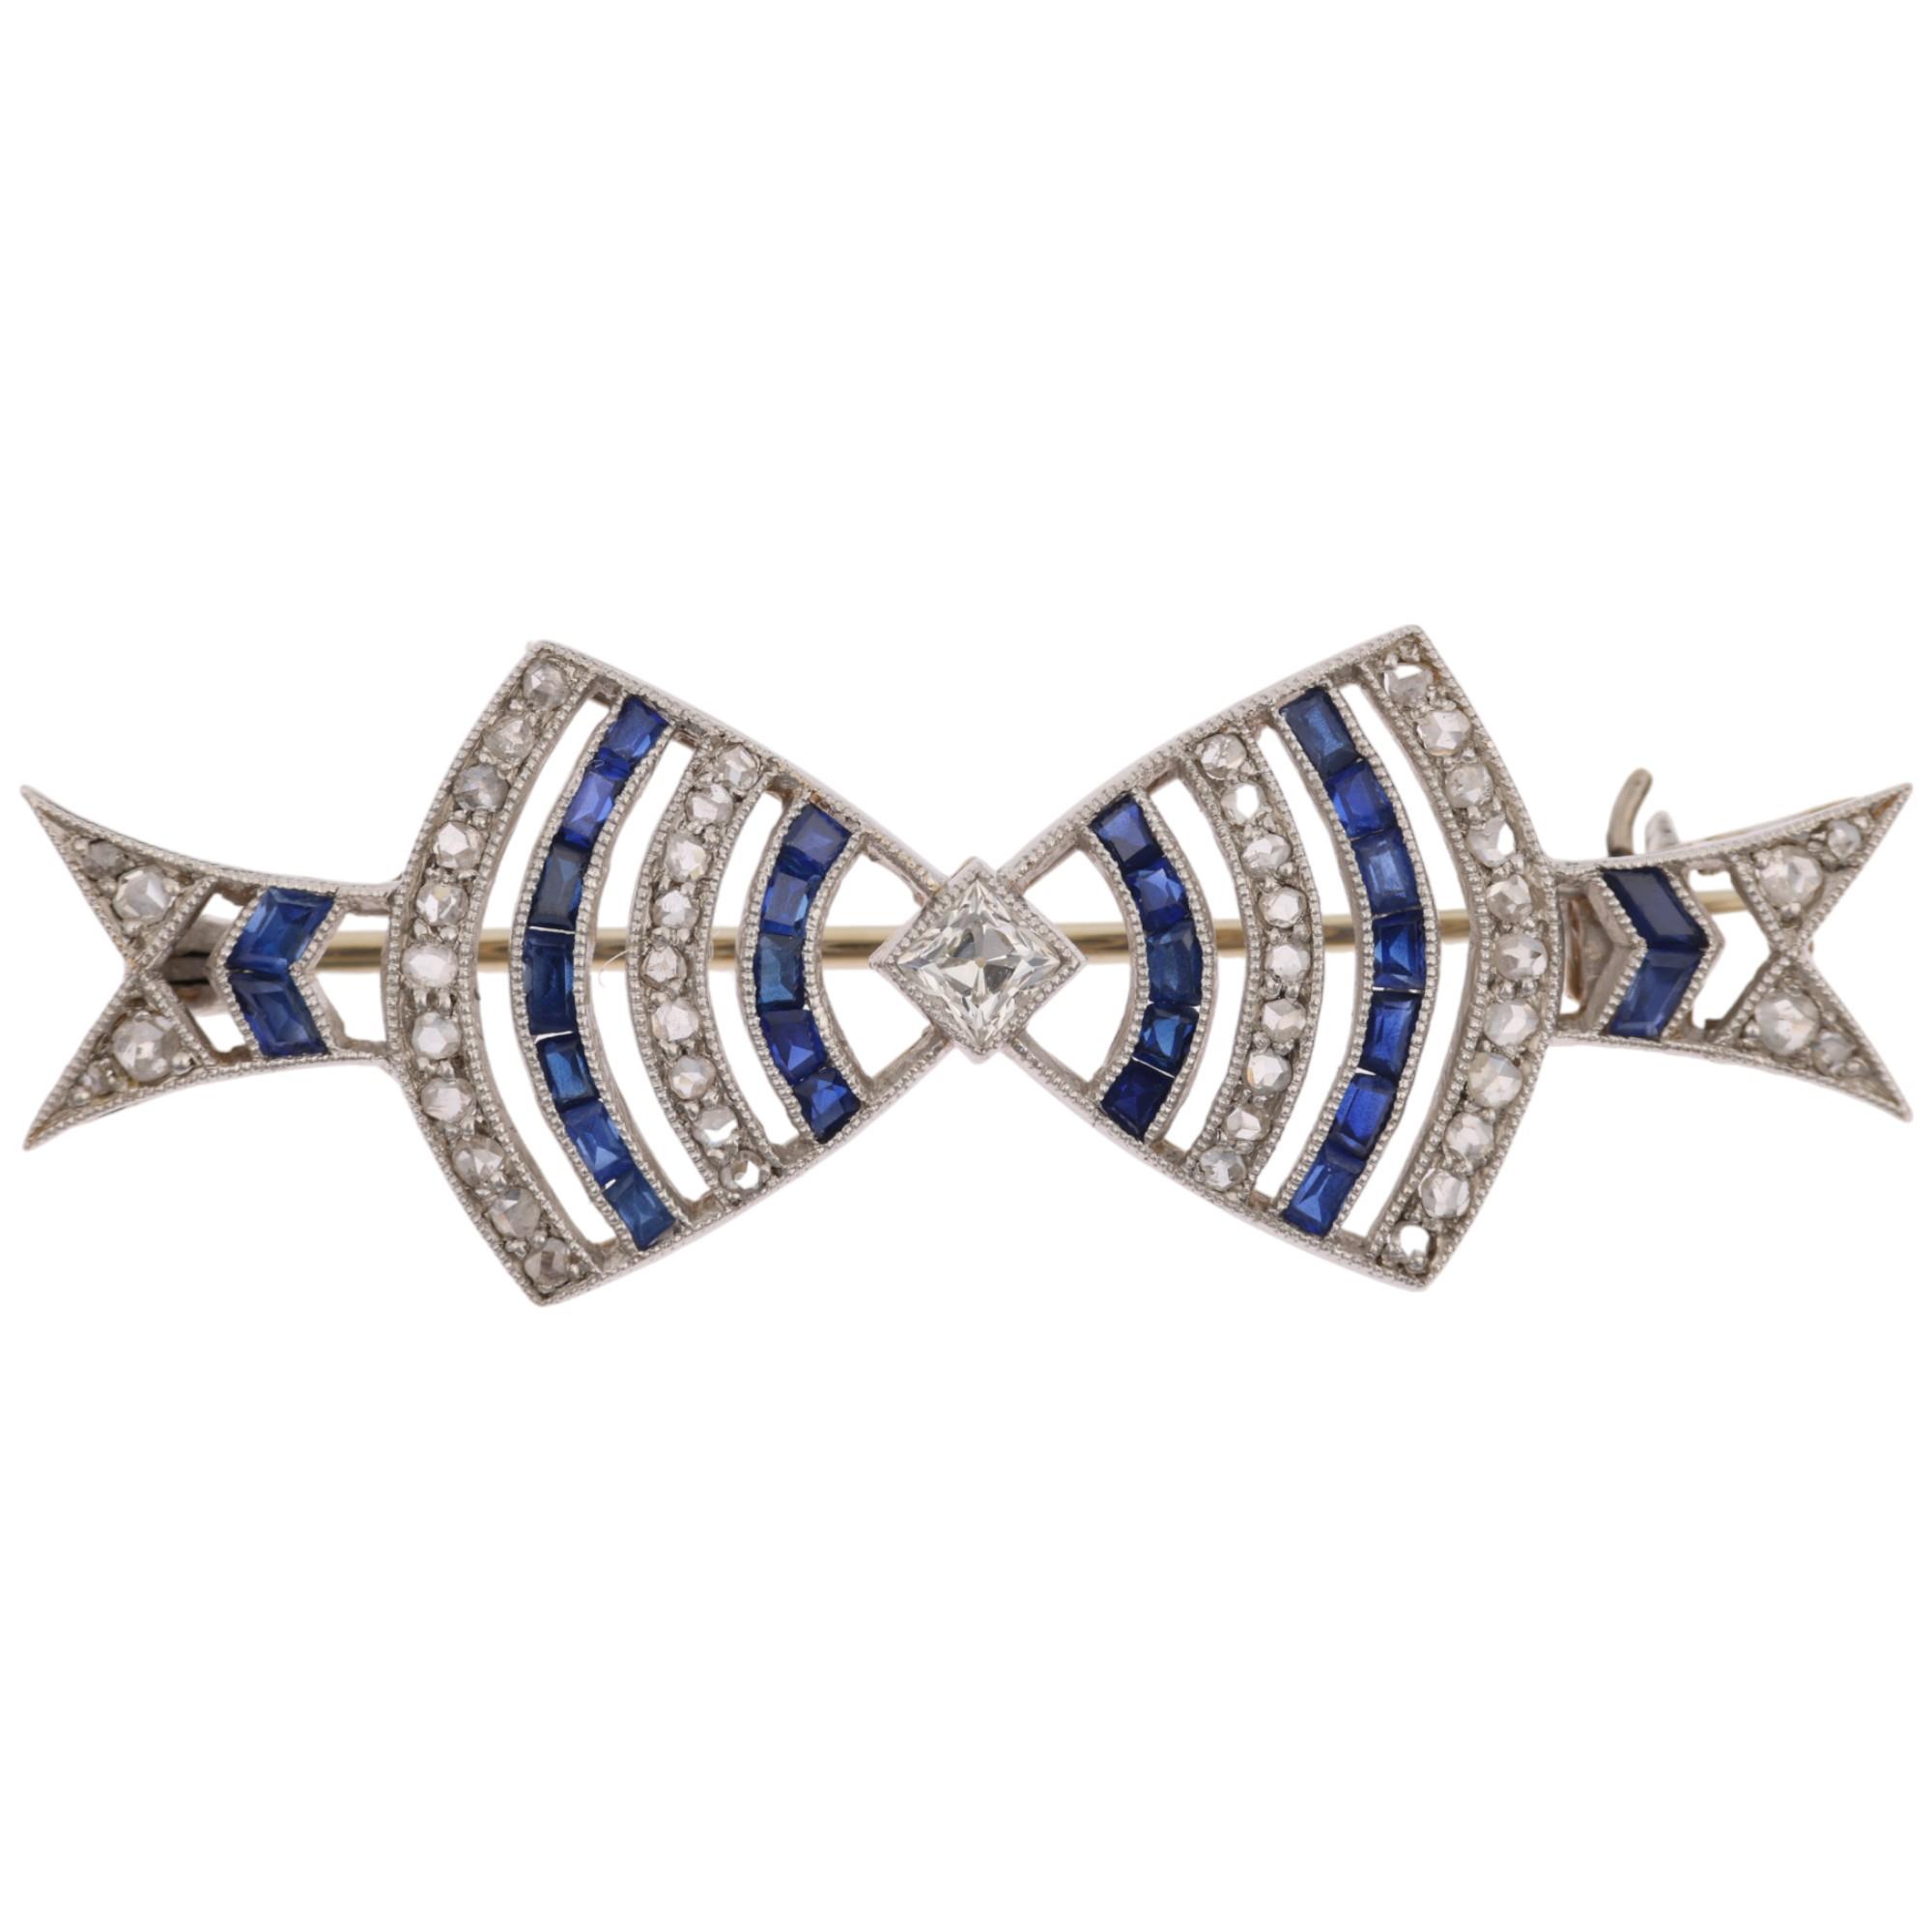 An Art Deco French sapphire and diamond openwork bow tie brooch, circa 1920, set with square and